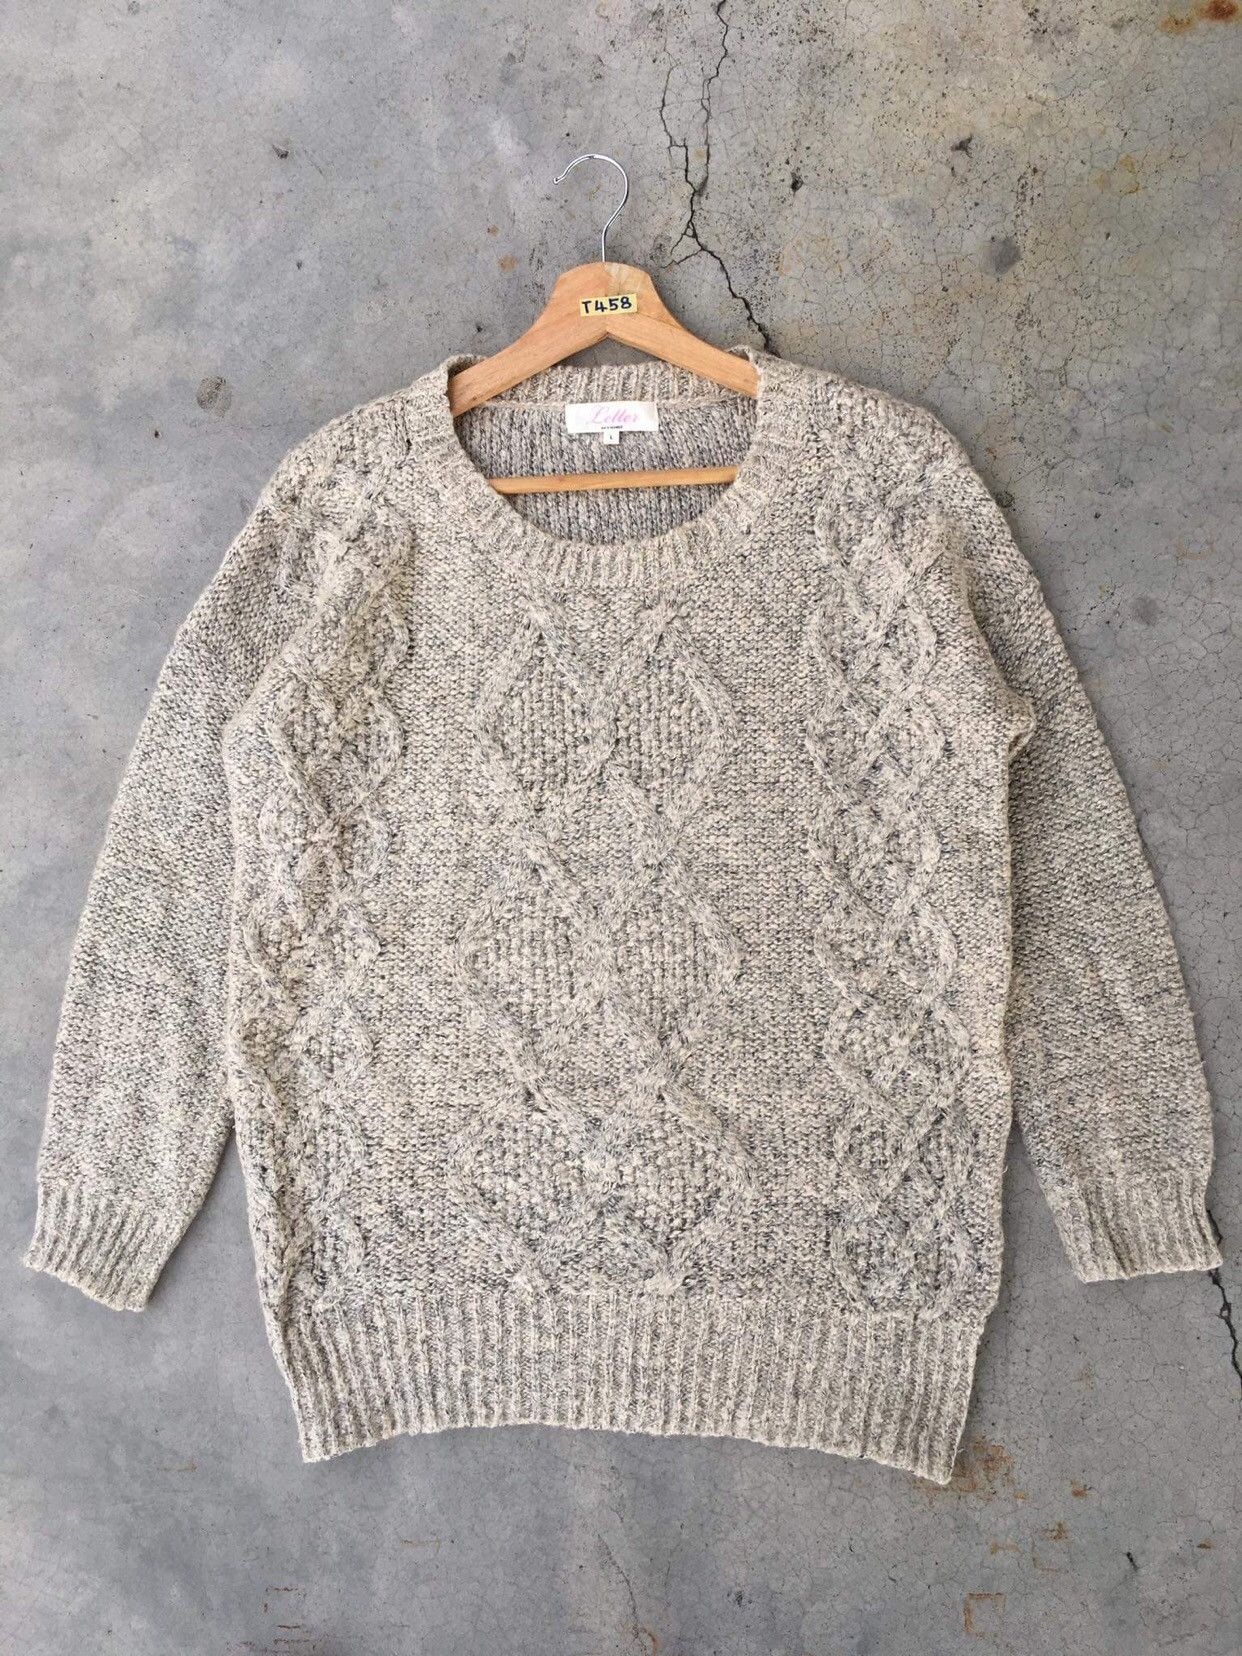 Japanese Brand 🔴LETTER Back Number Sweater Pureknit Pullover Size US M / EU 48-50 / 2 - 2 Preview